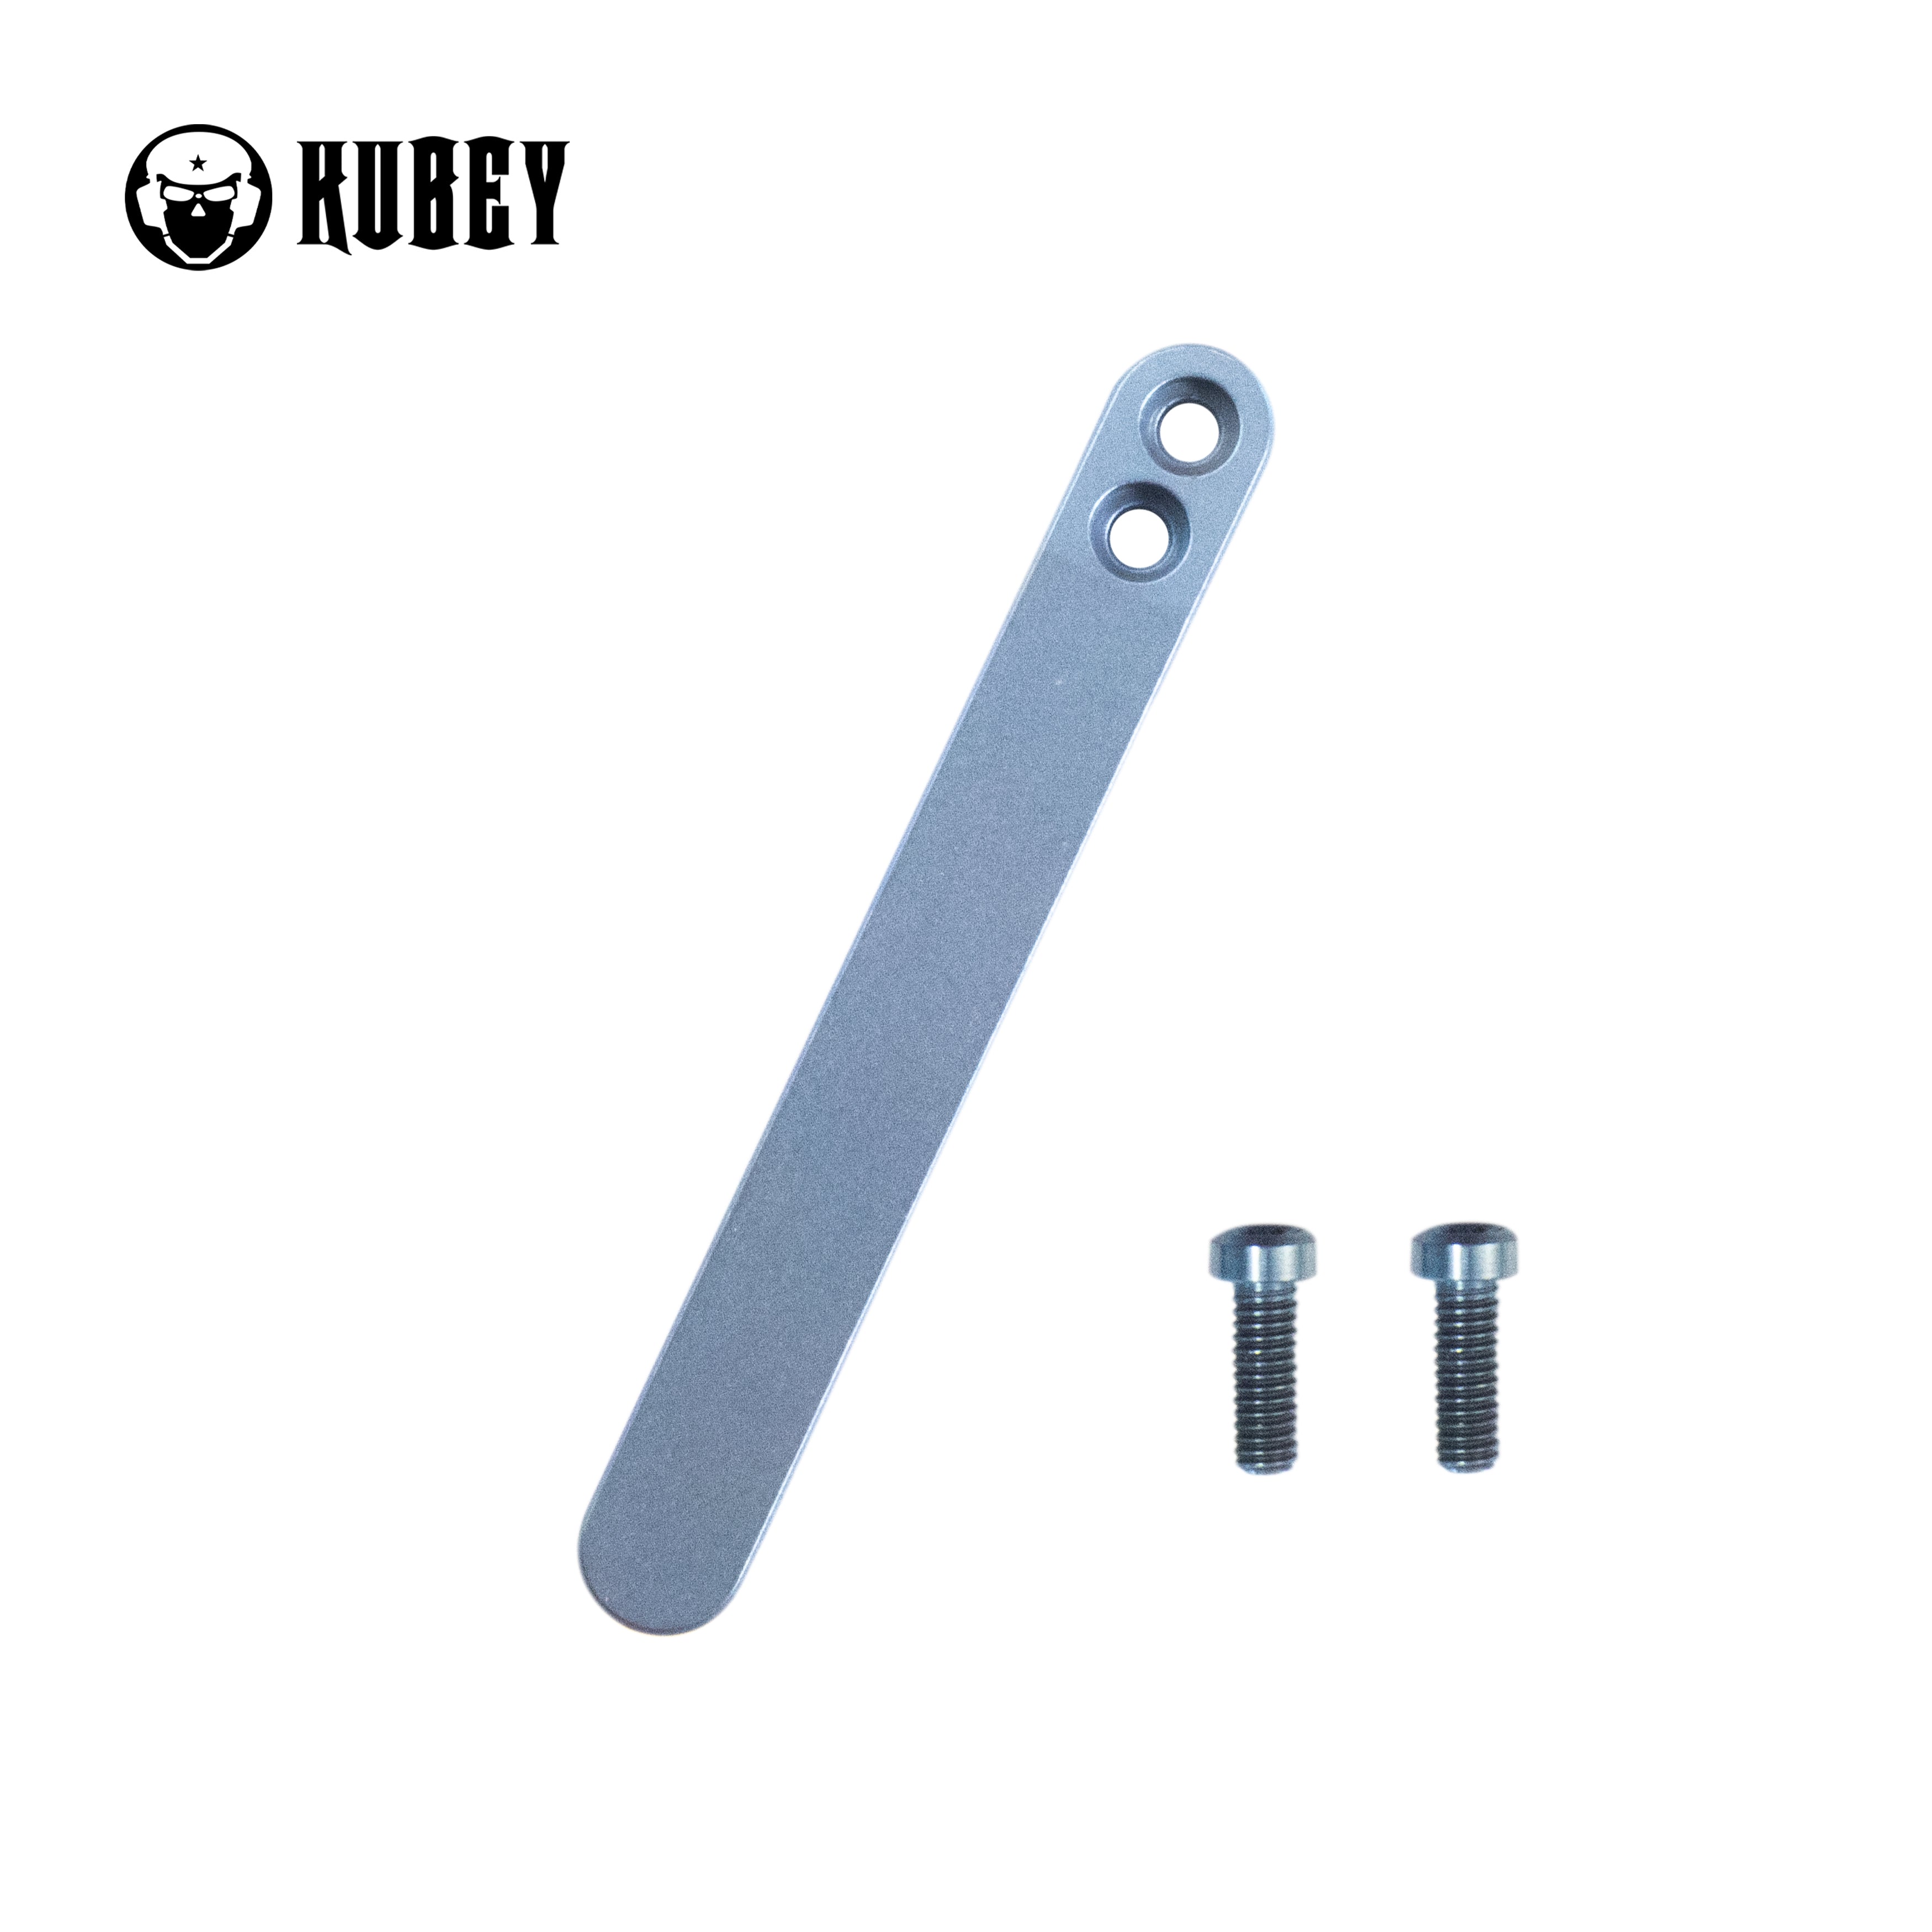 Kubey Titanium Clip for Folding Knives, 1 Piece with 2 Screws, Blue, KH032